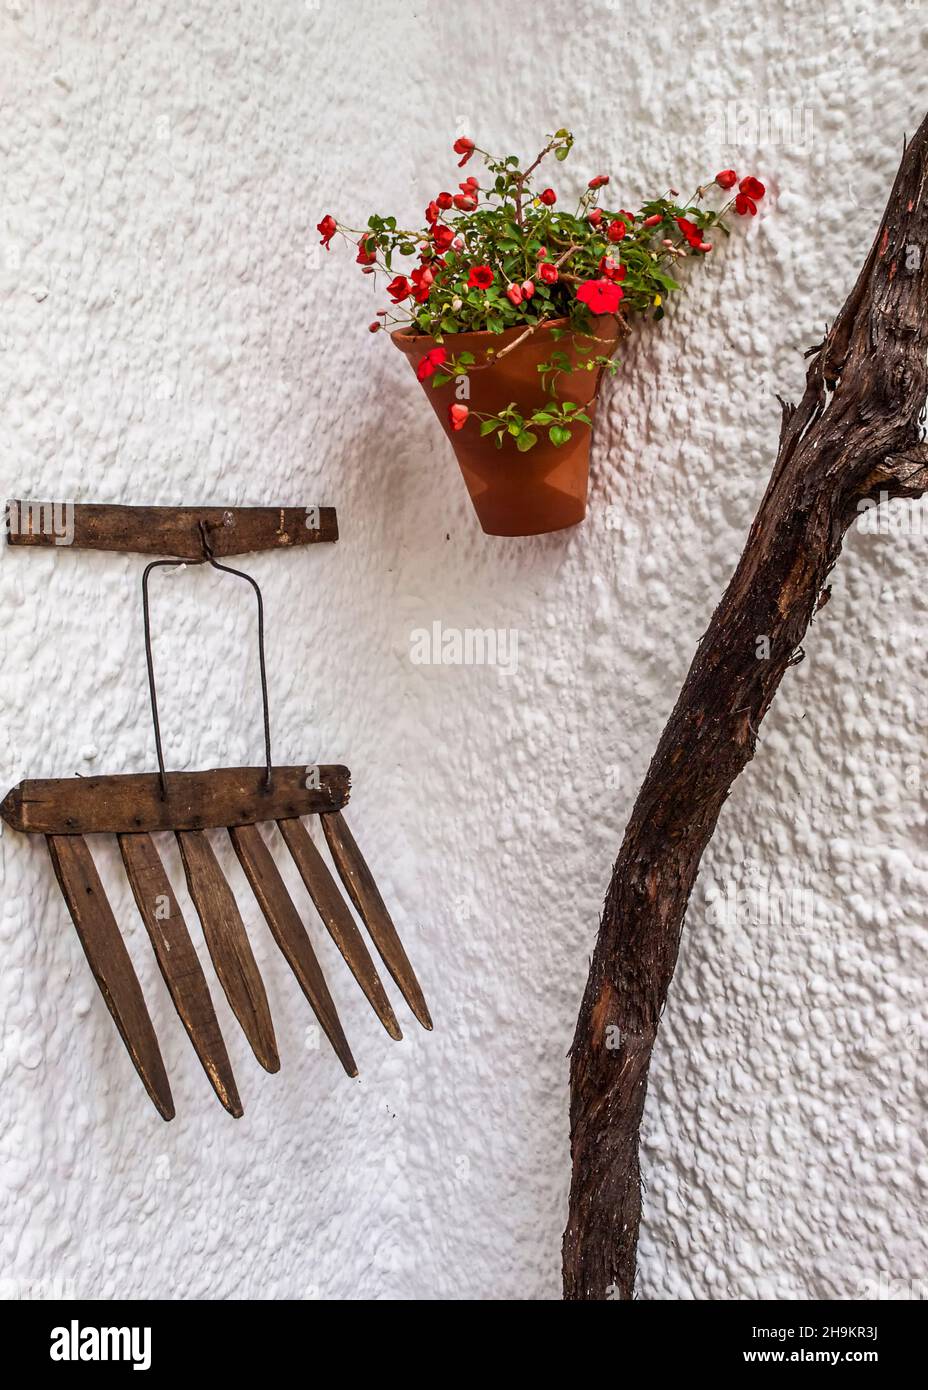 https://c8.alamy.com/comp/2H9KR3J/various-antique-objects-from-the-countryside-hung-as-decoration-in-a-typical-andalusian-house-2H9KR3J.jpg